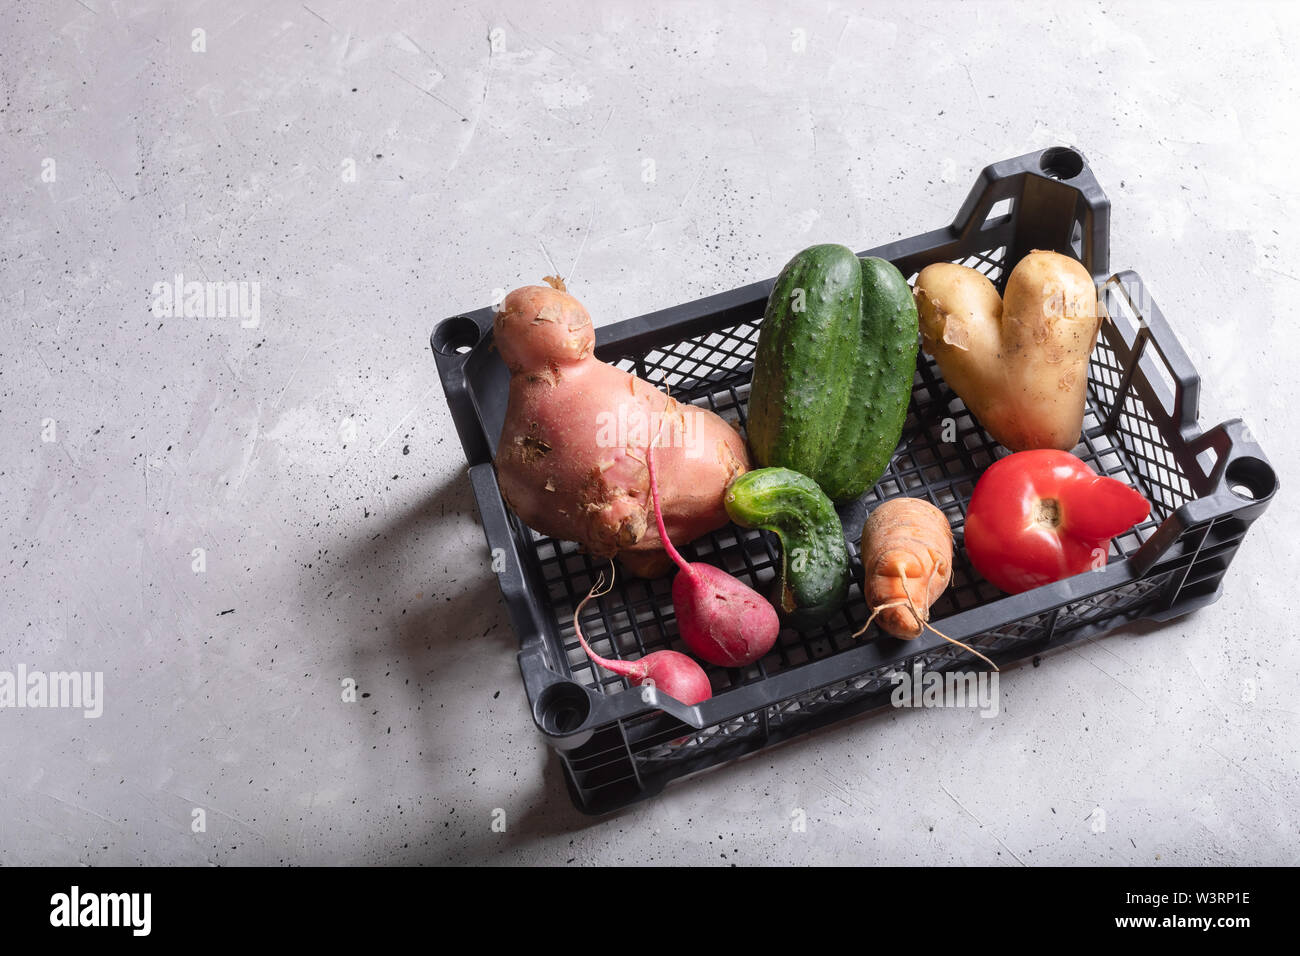 Ripe healthy ugly vegetables in plastic box on grey concrete background. Stock Photo